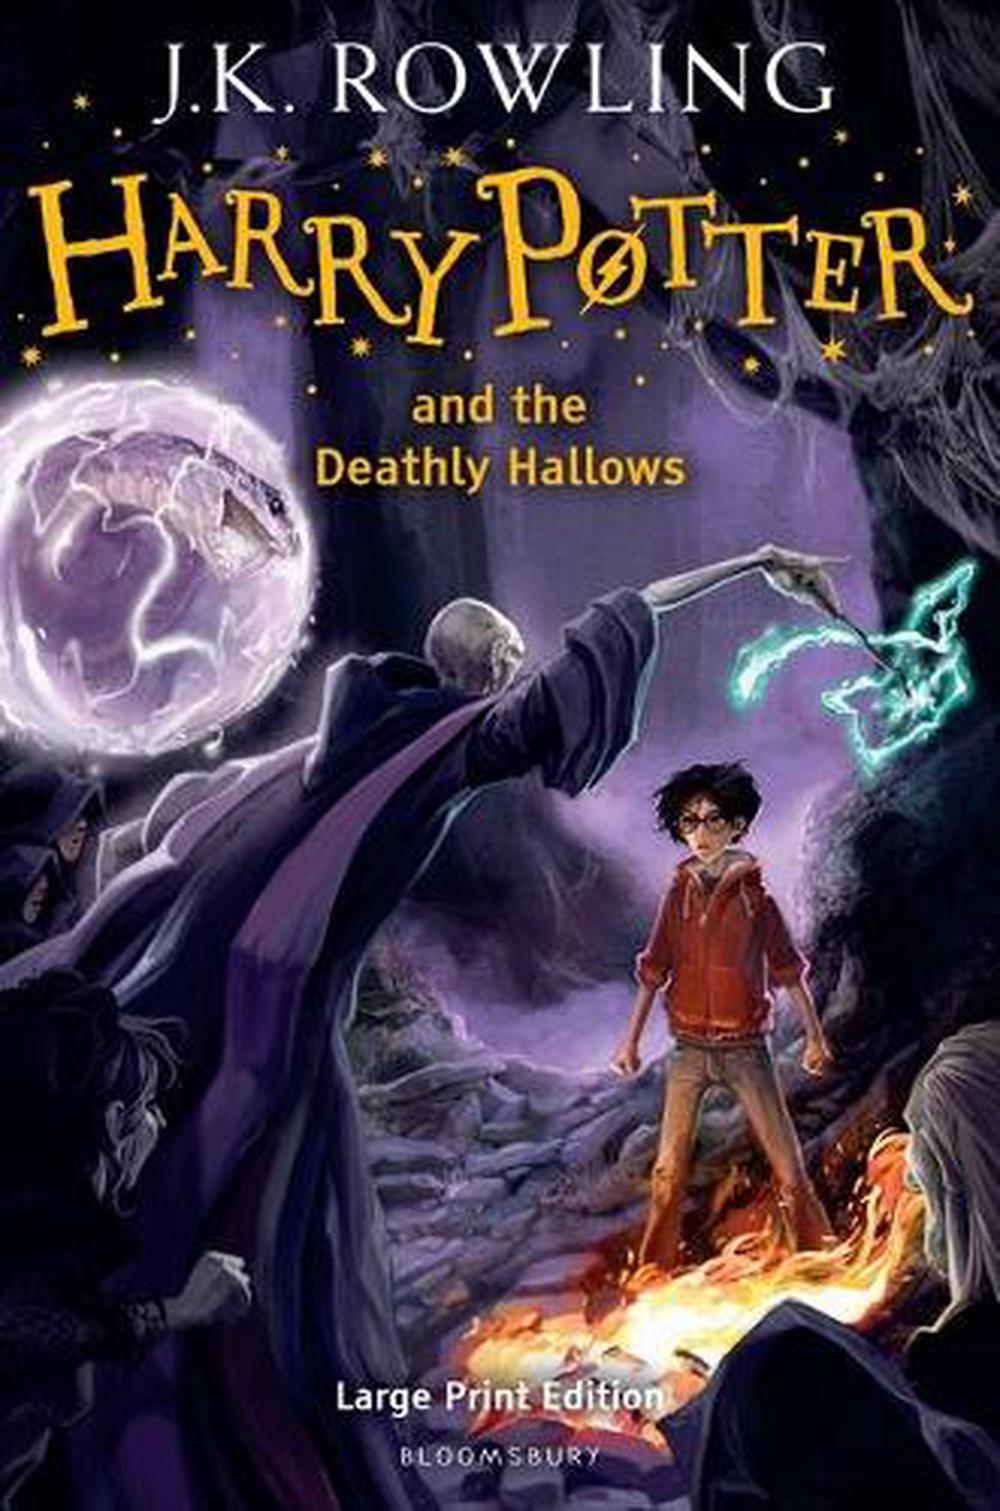 harry potter and the deathly hallows audiobook listen online free